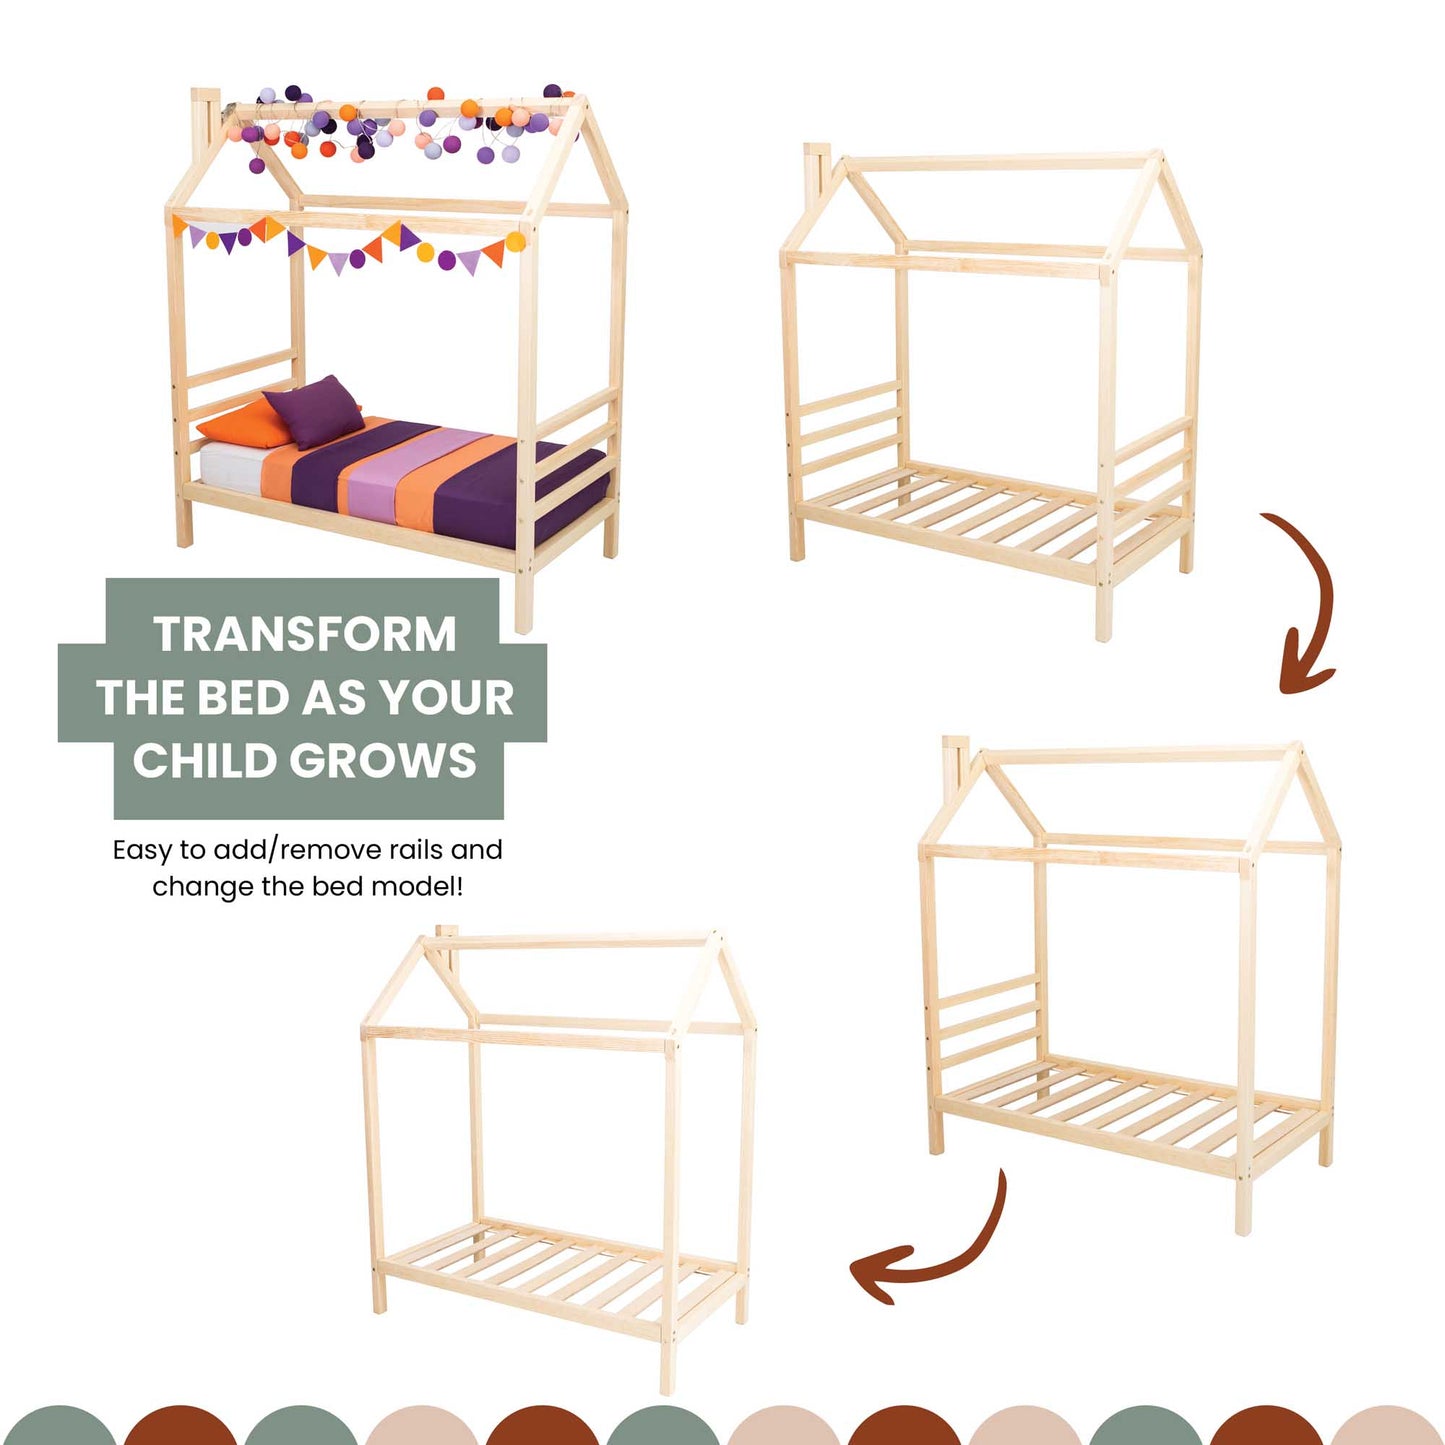 Transform your child's bed into a [Kids' house bed on legs with a headboard and footboard].